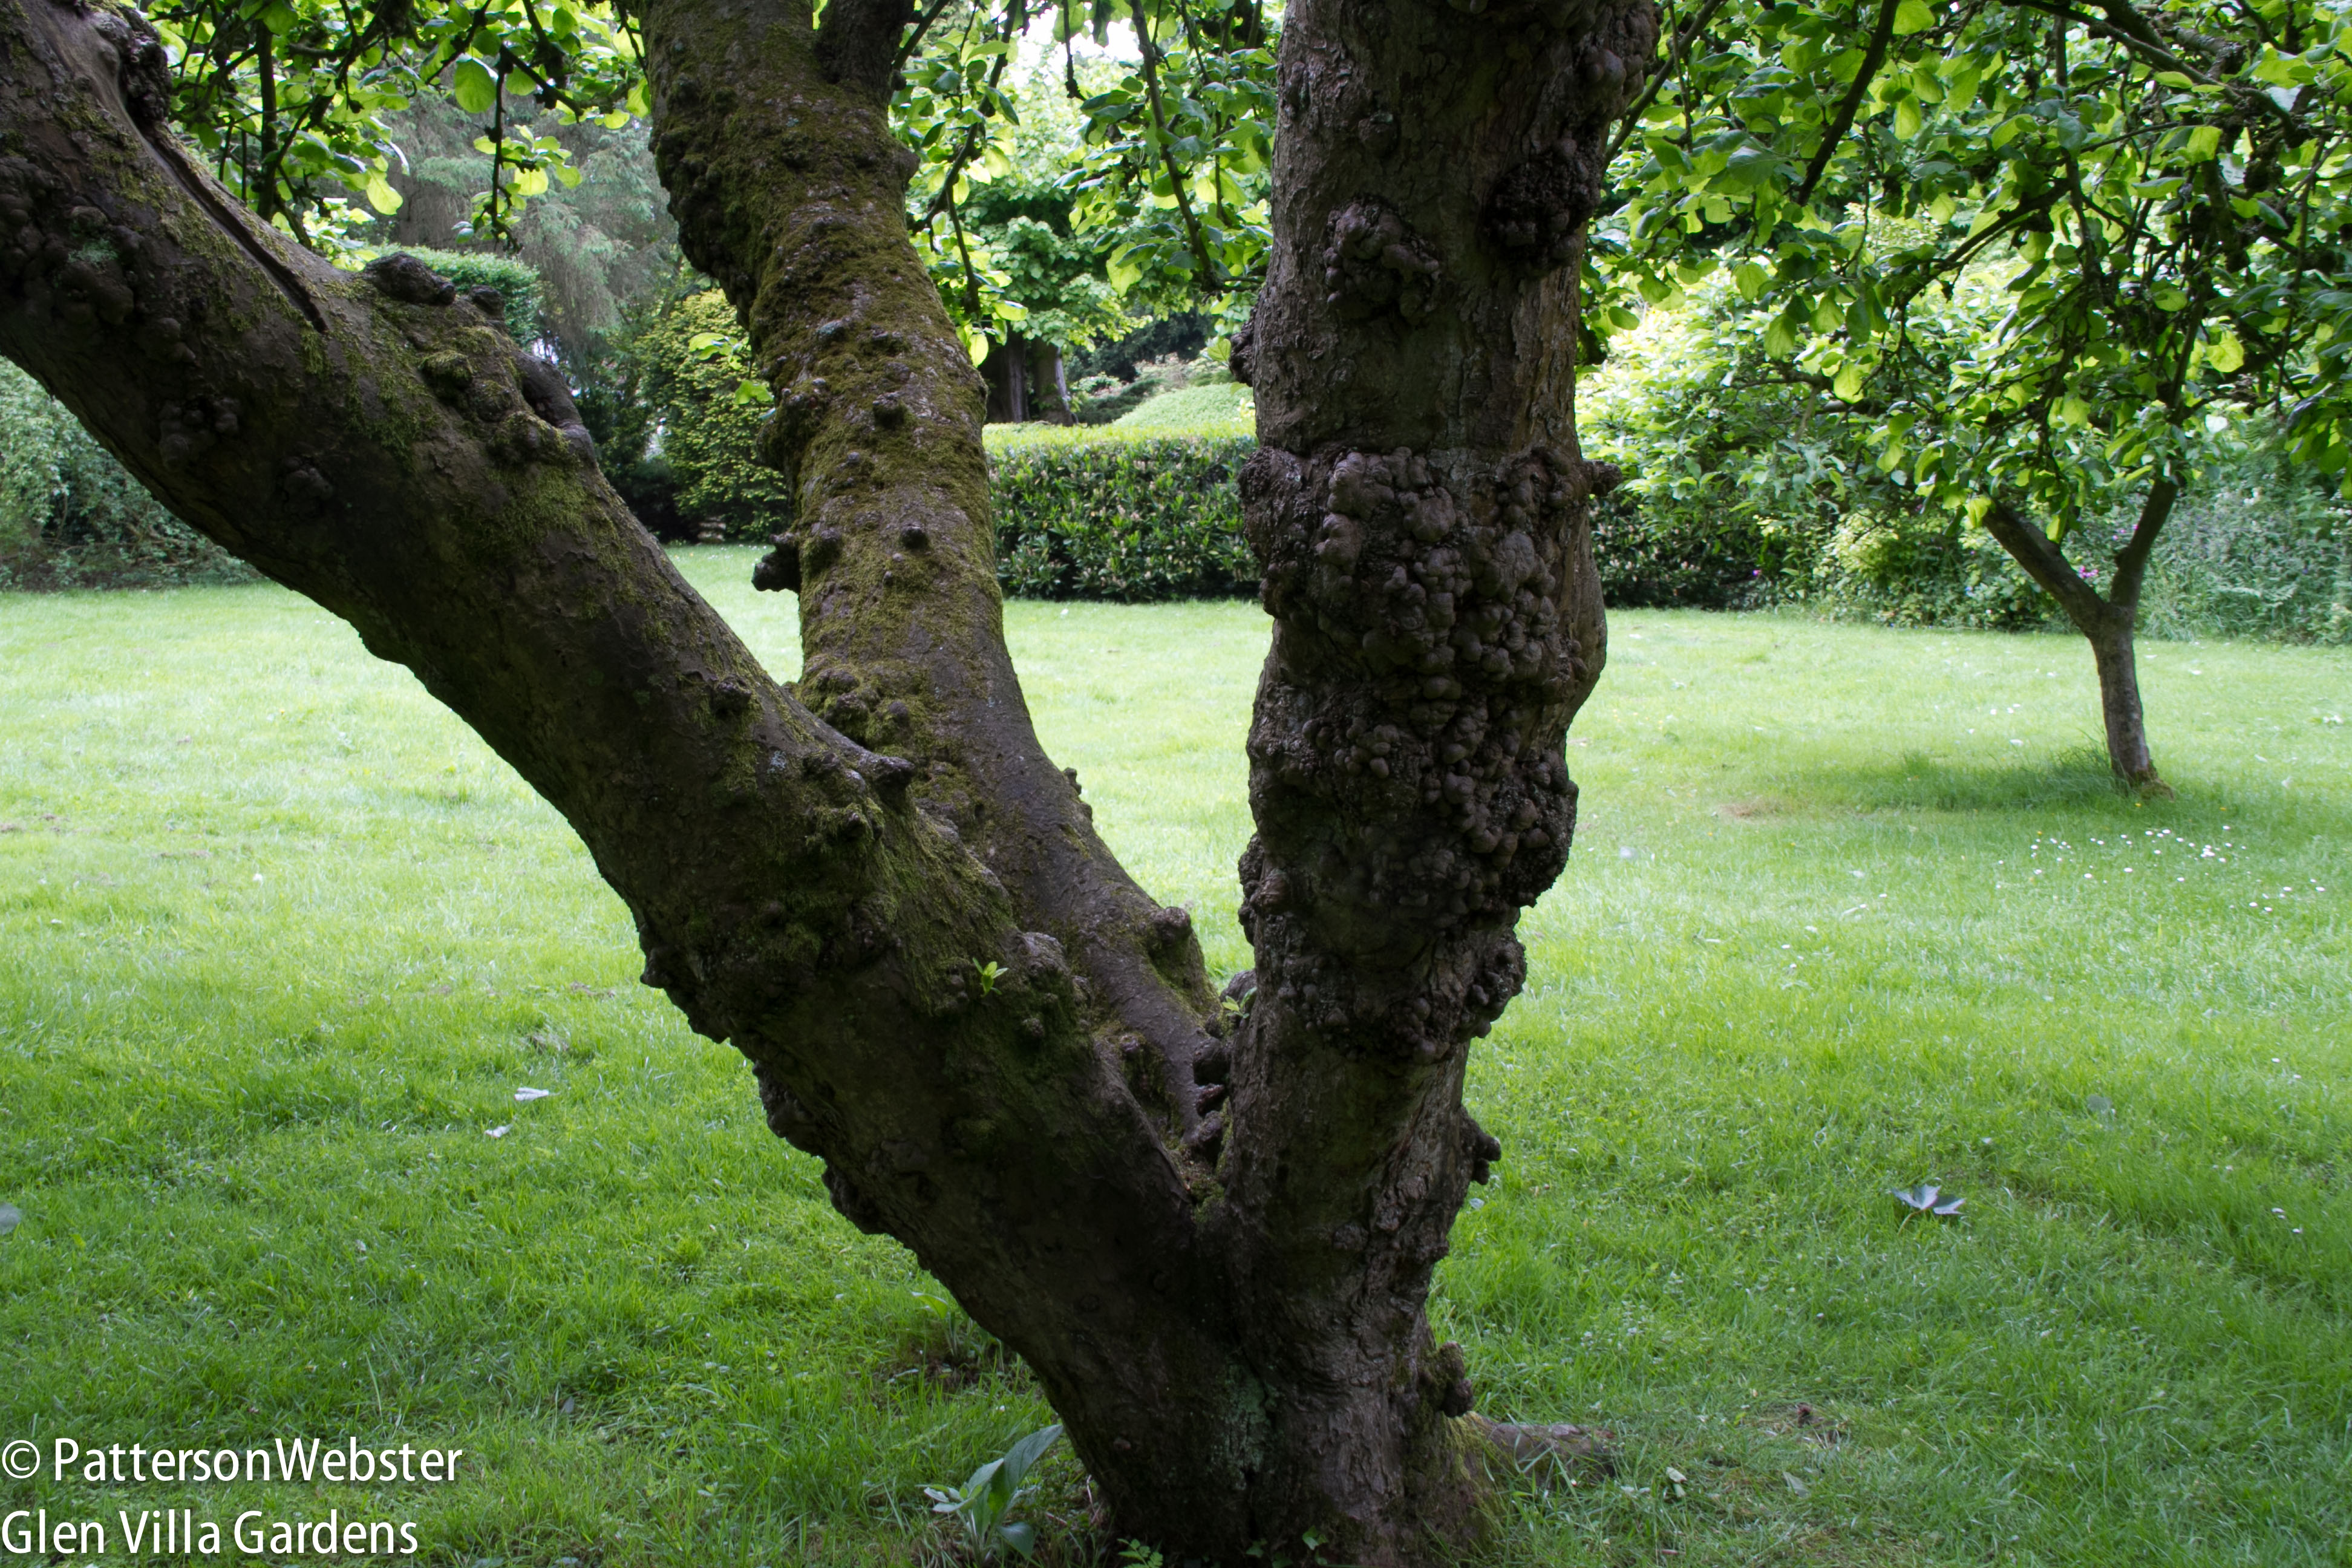 A warty apple tree takes its mark on a section of open lawn.